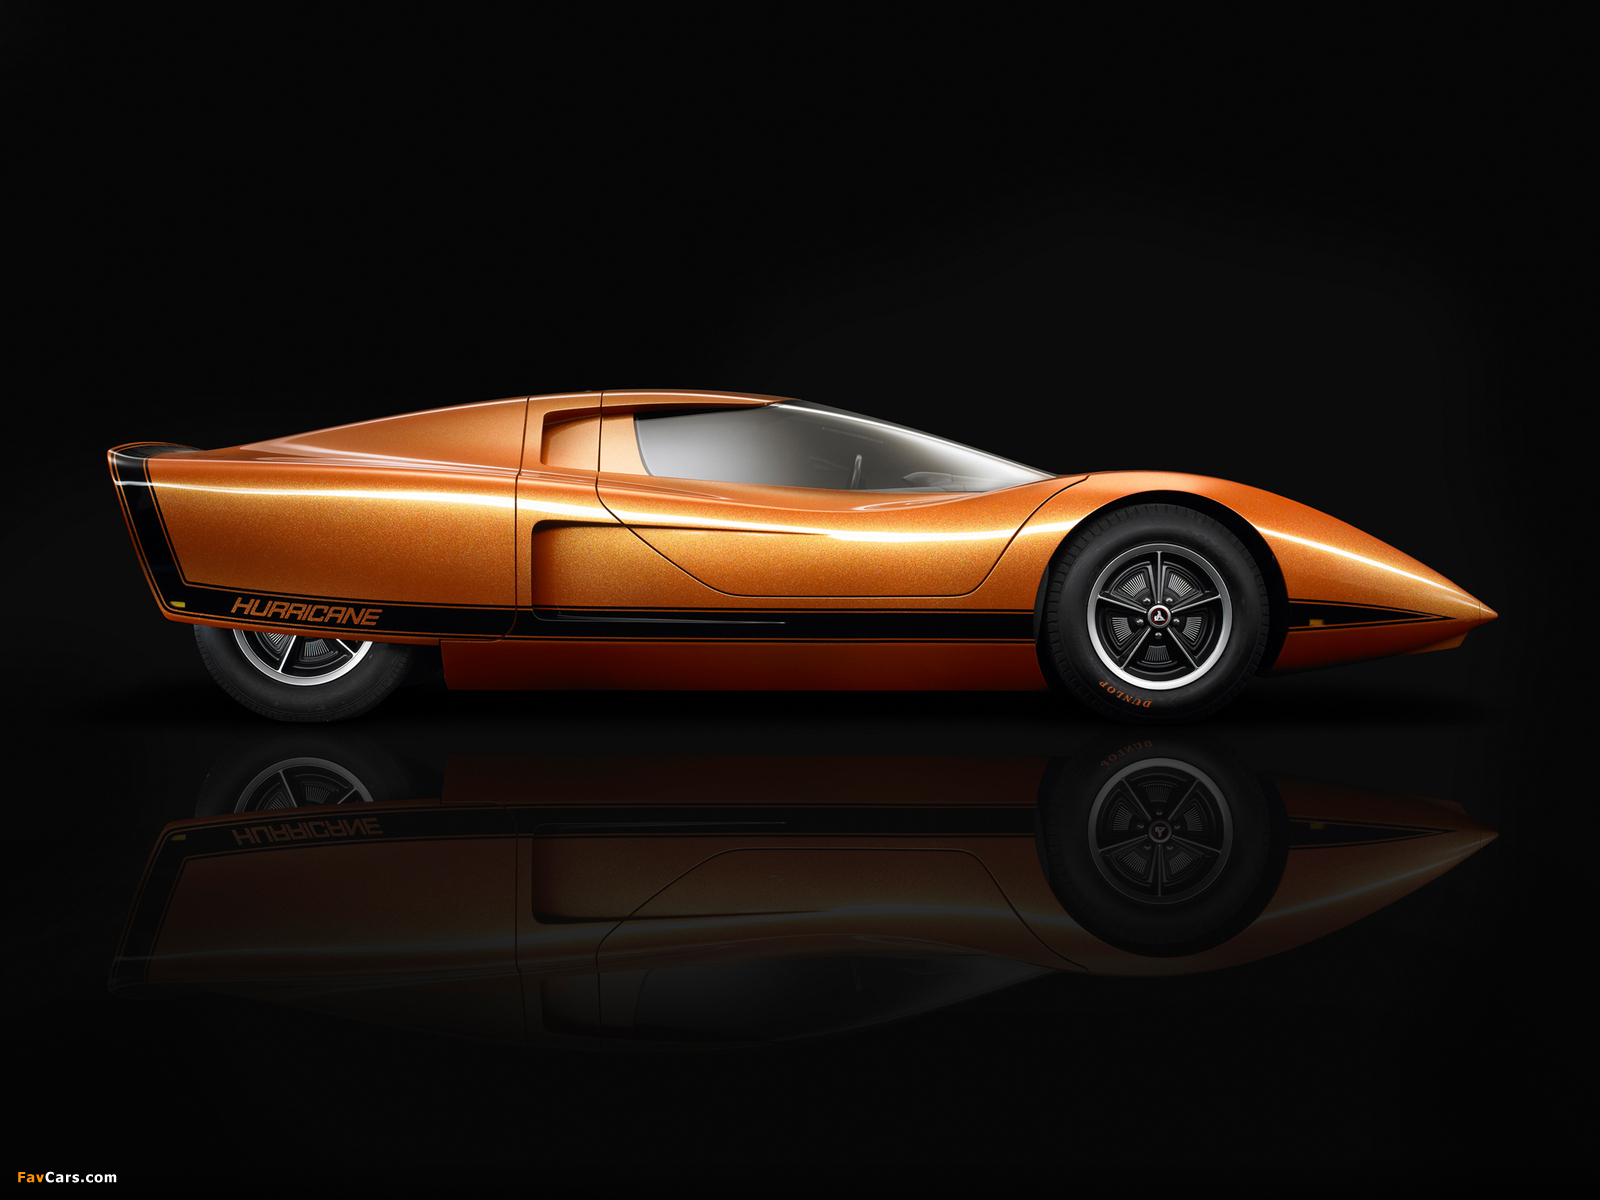 Images of Holden Hurricane Concept Car 1969 (1600 x 1200)